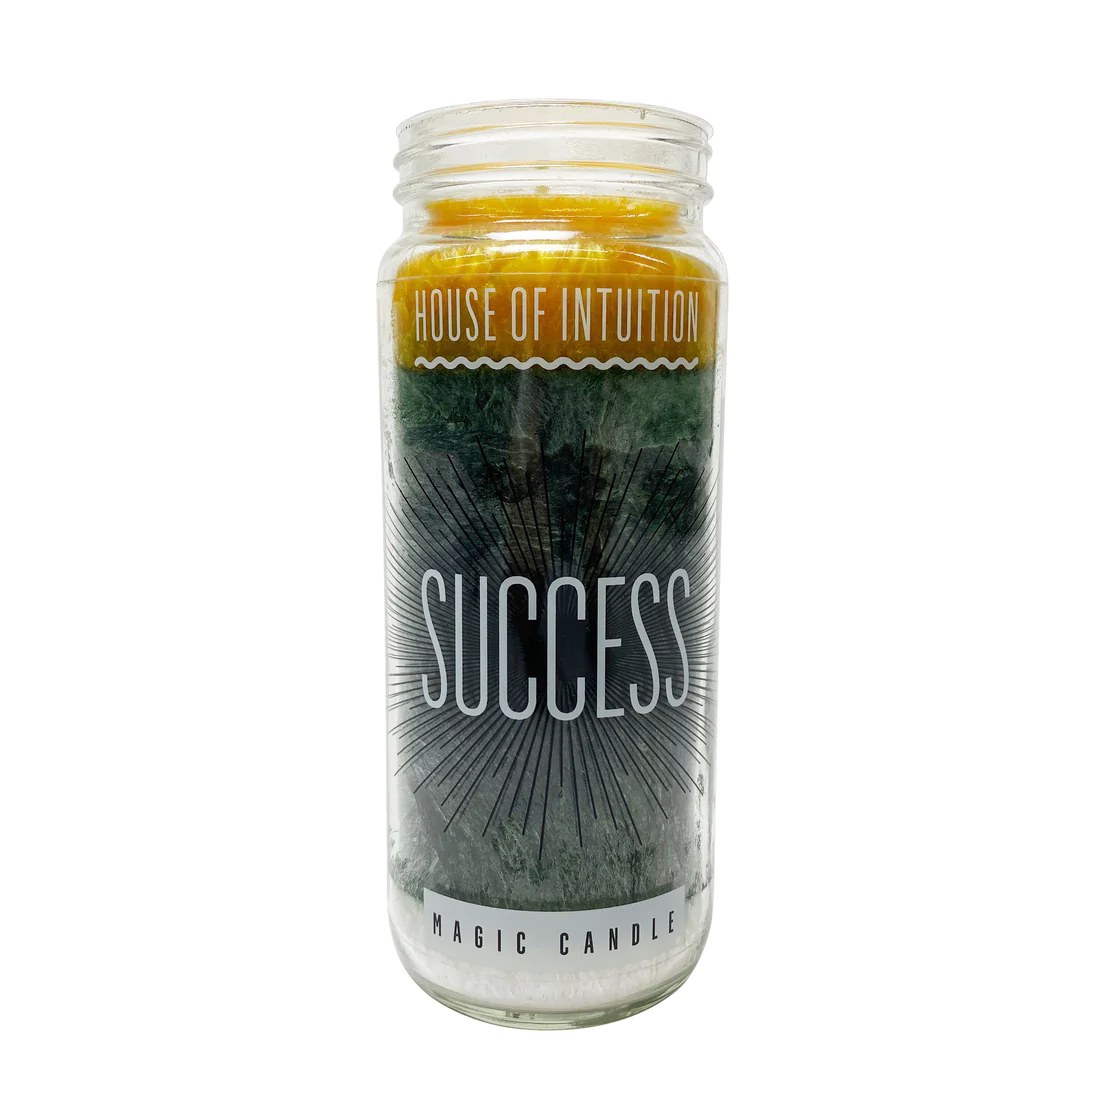 House of Intuition Success Magic Candle